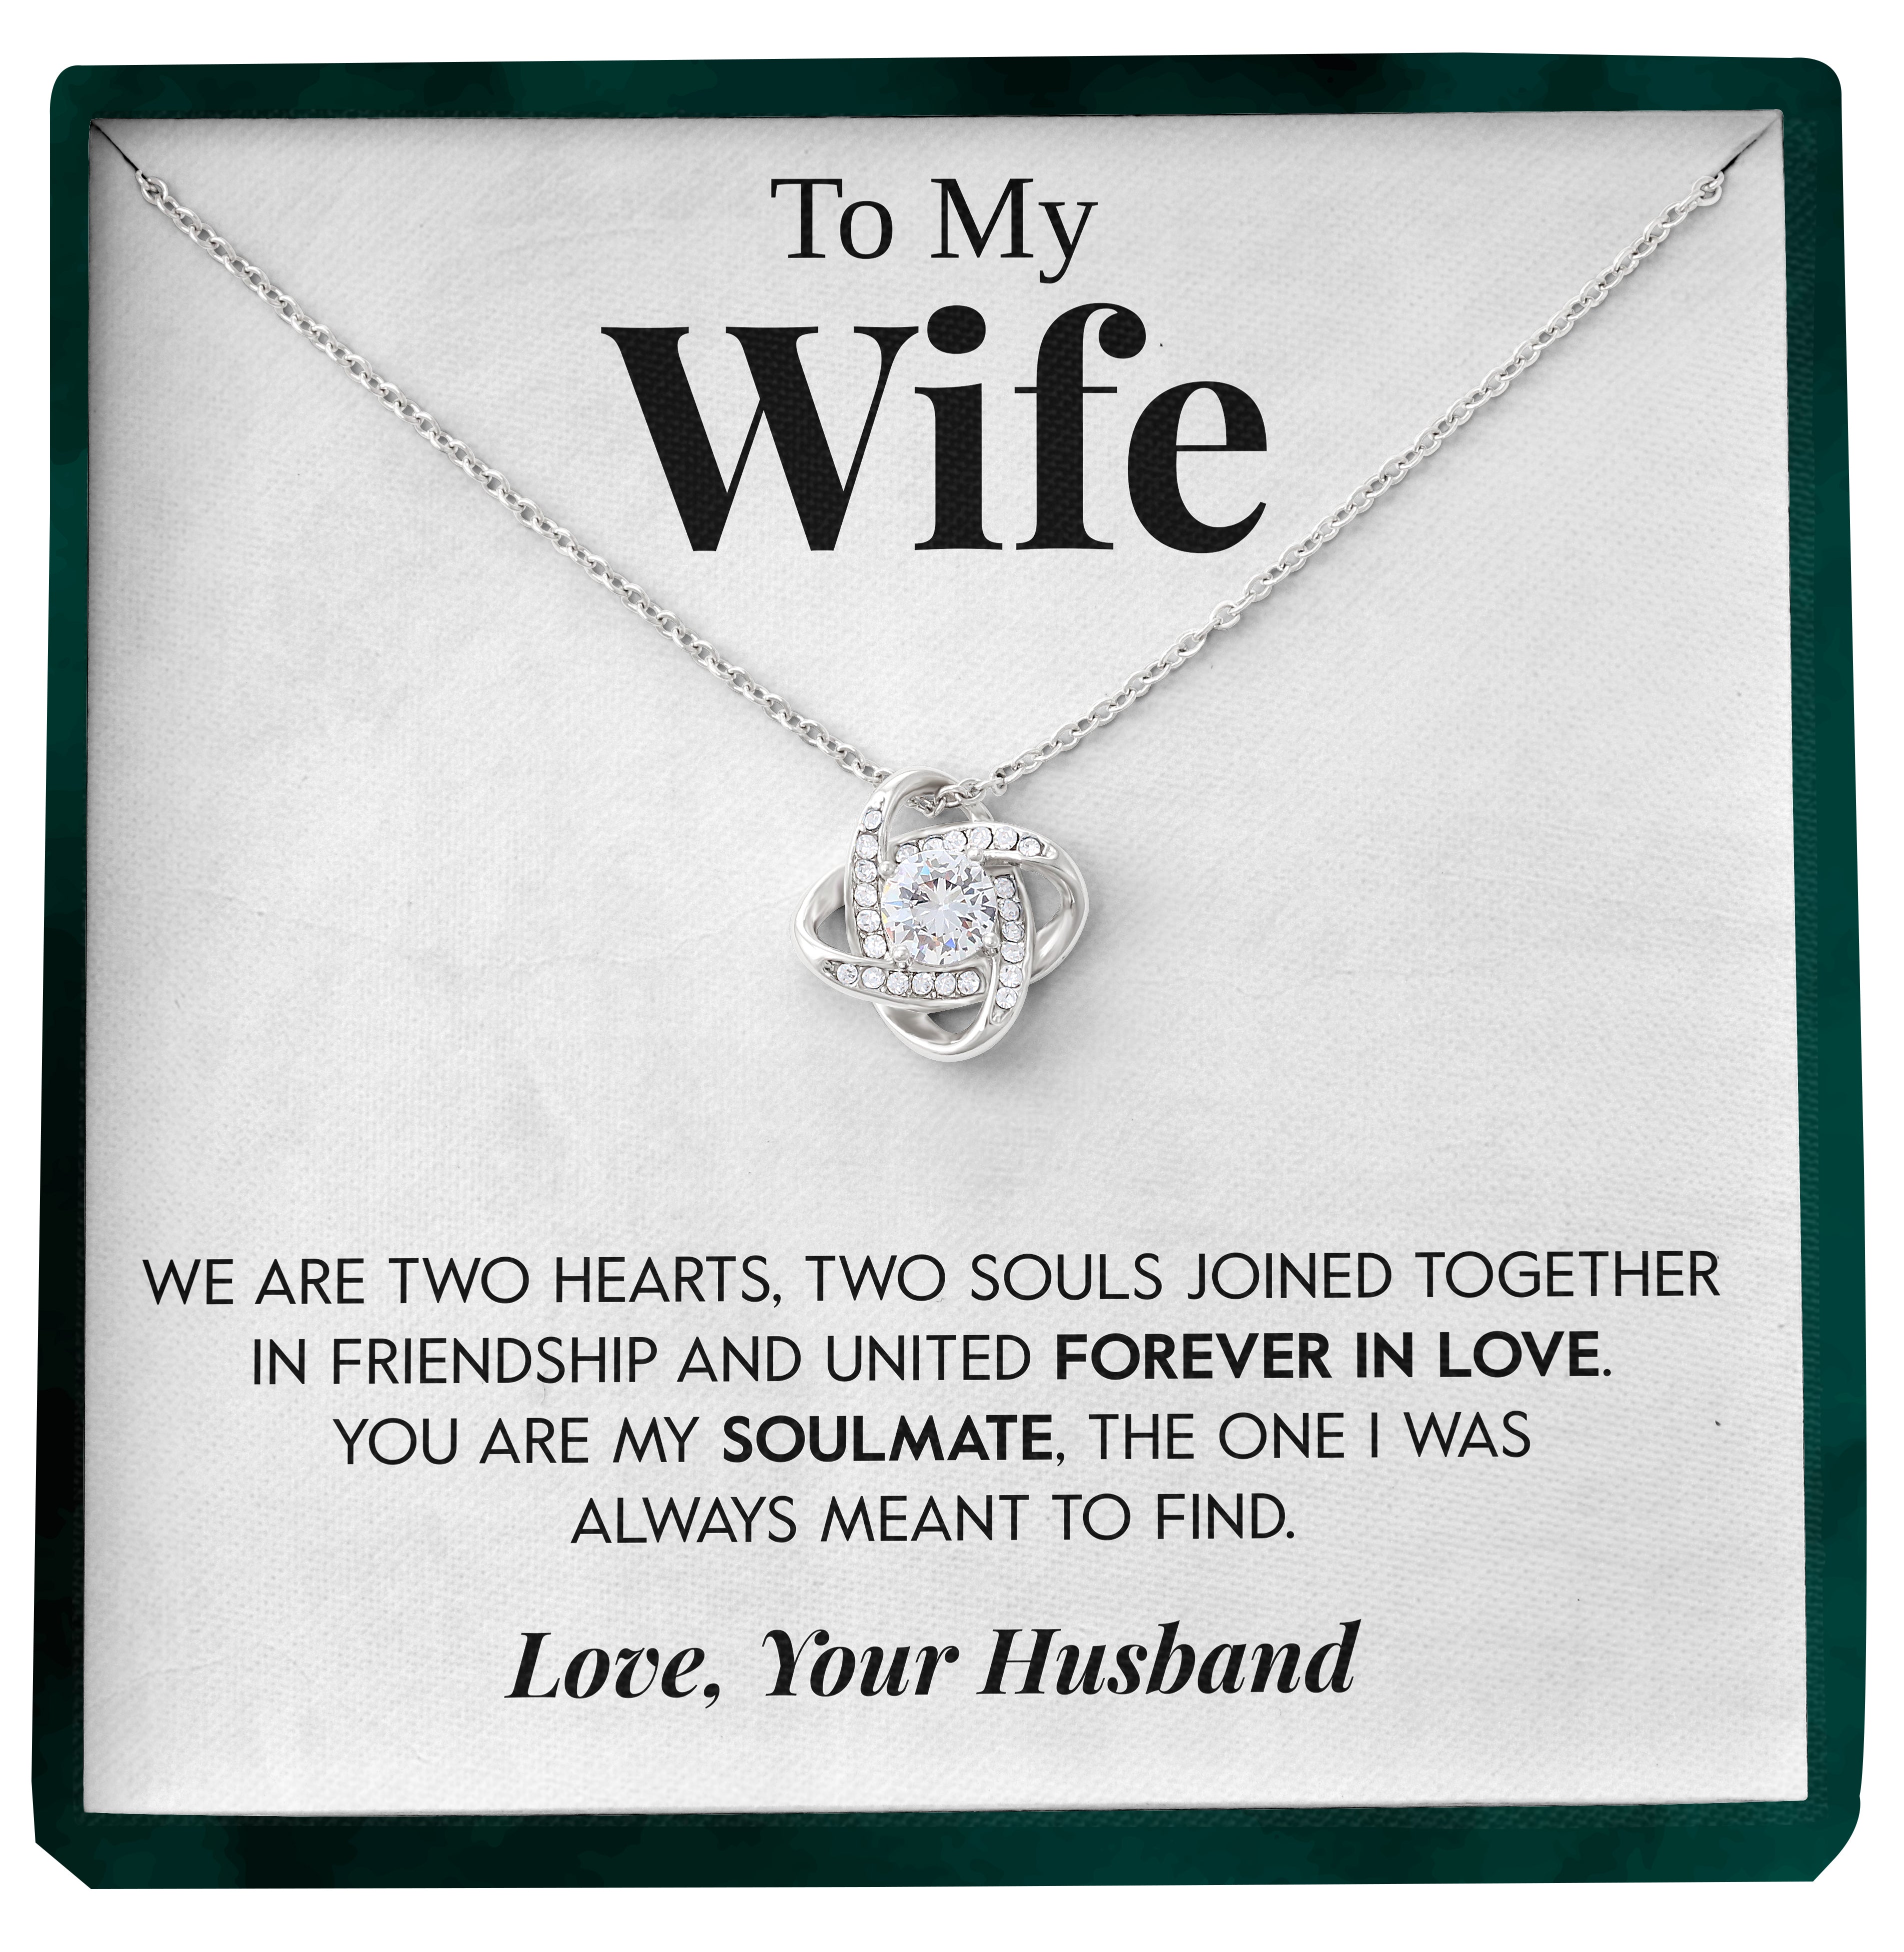 To My Wife | "Forever in Love" | Love Knot Necklace